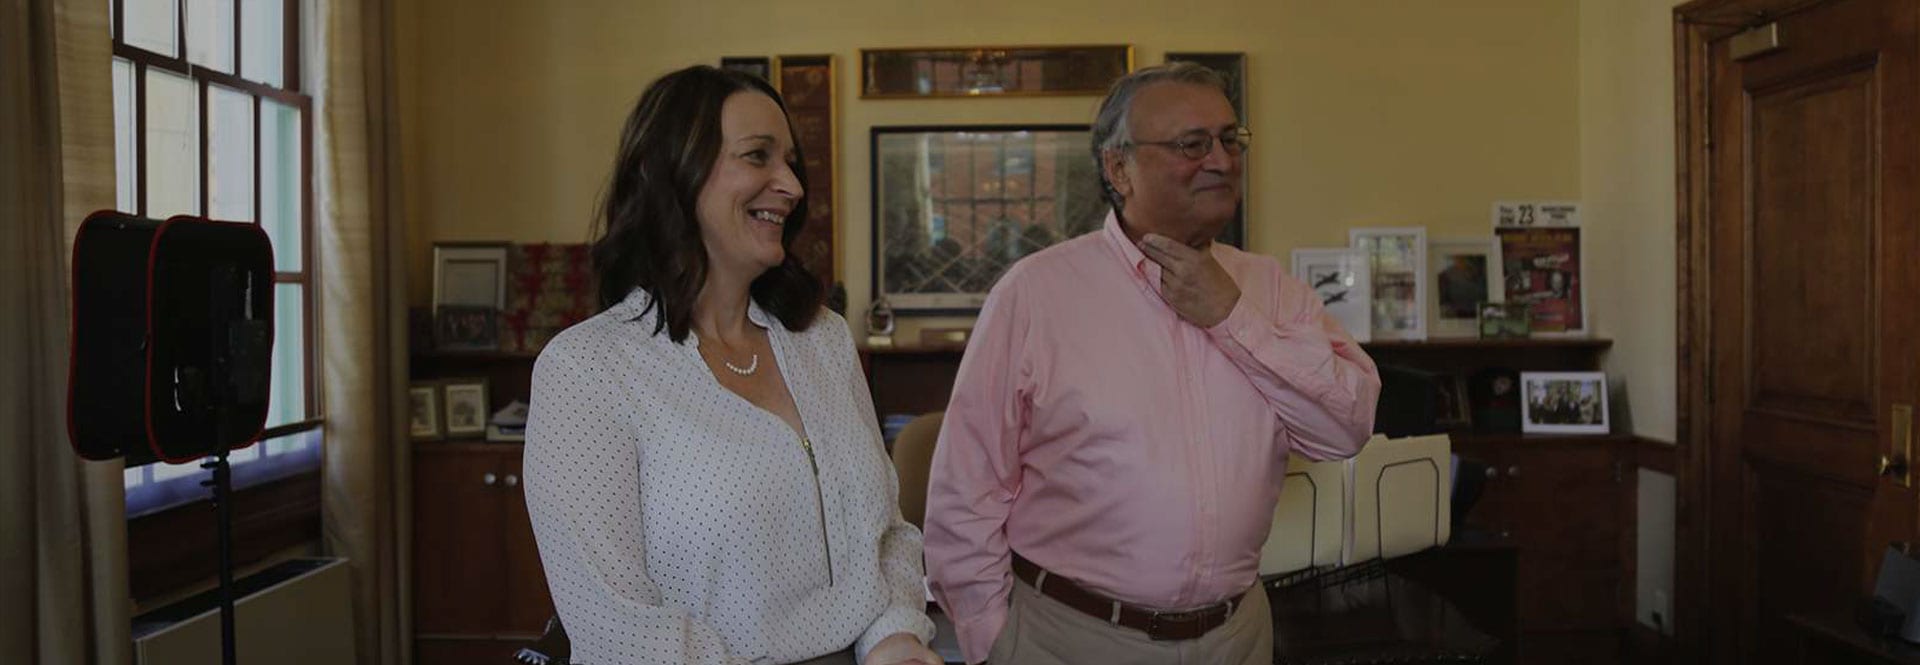 A LEGACY OF LEADERSHIP: Pittsfield Mayor Linda Tyer and her predecessor, James Ruberto, on leading through turbulent times